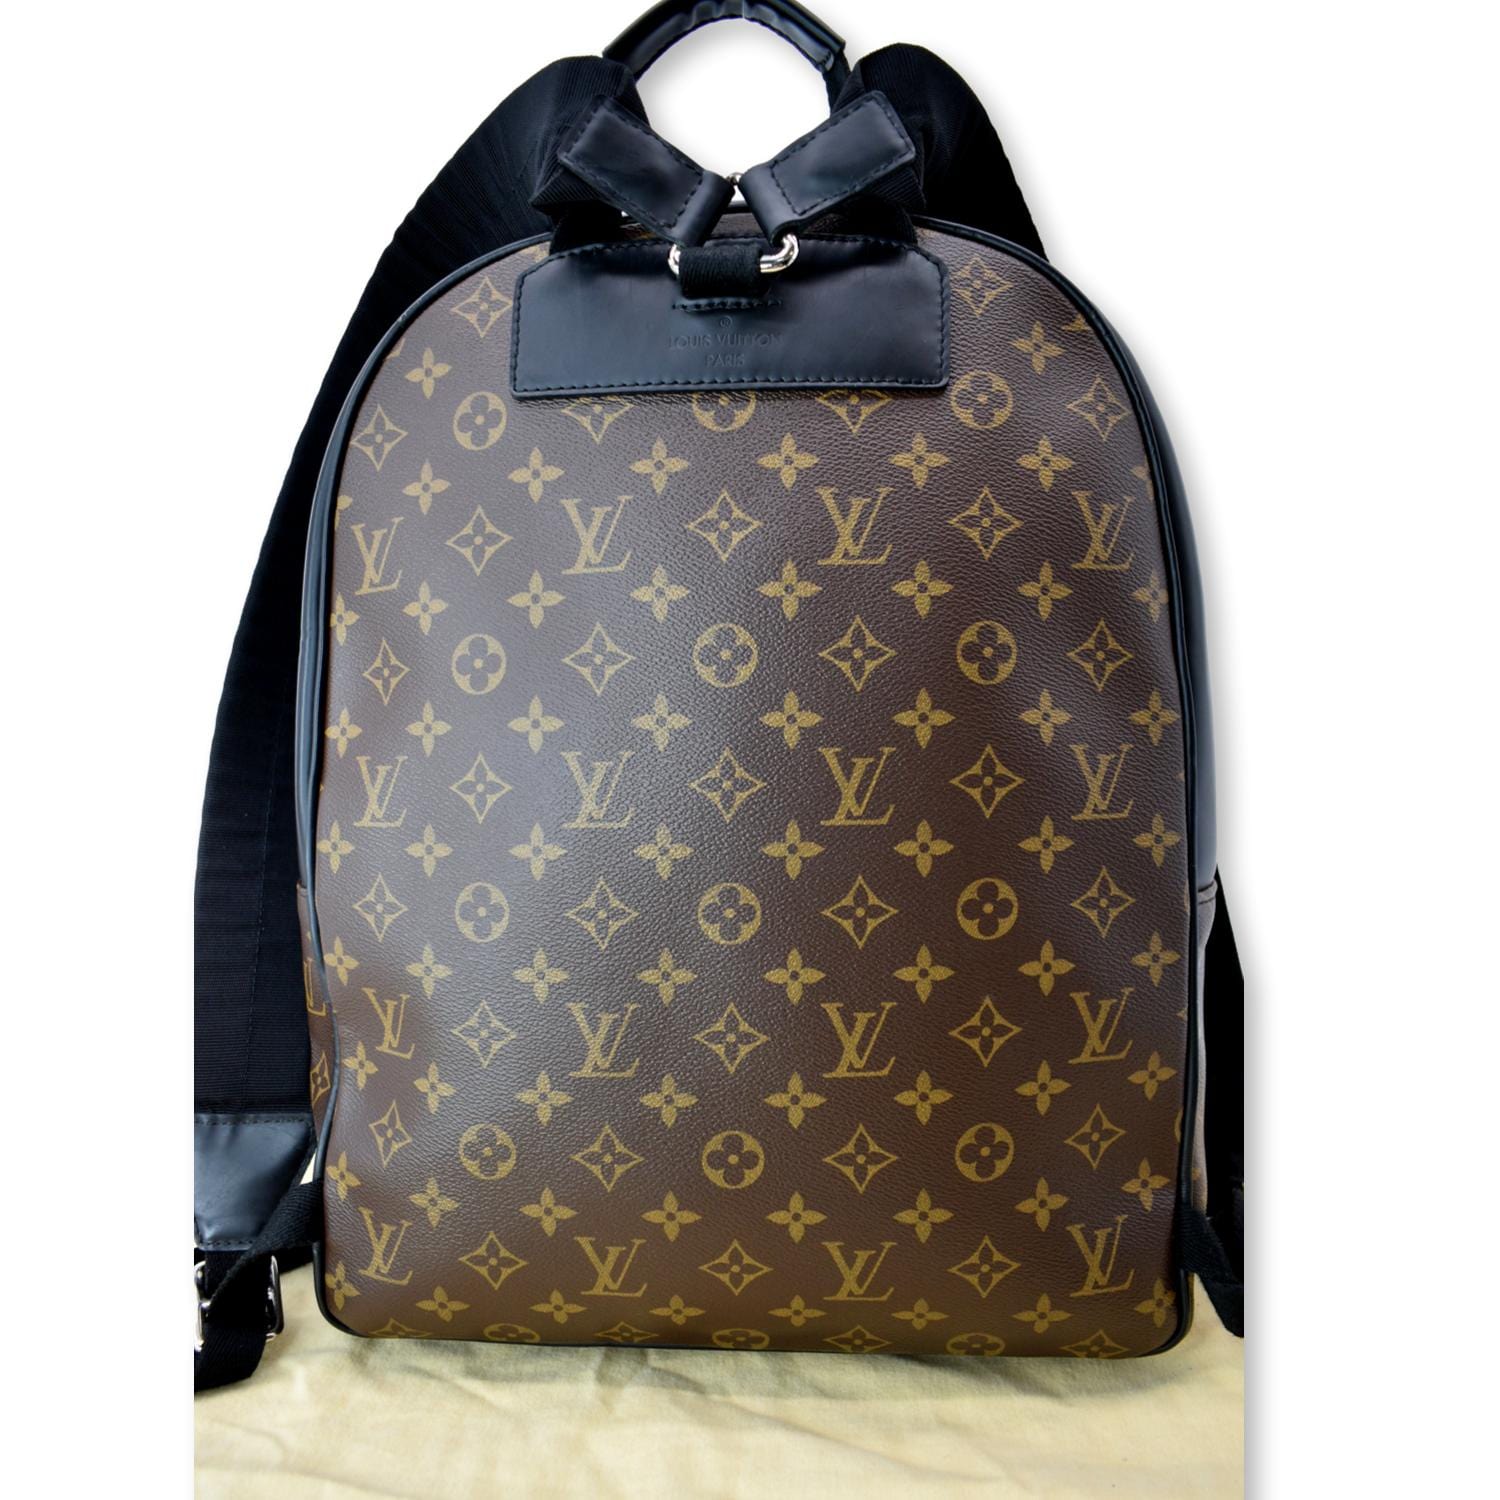 Josh backpack leather bag Louis Vuitton Brown in Leather - 32679090